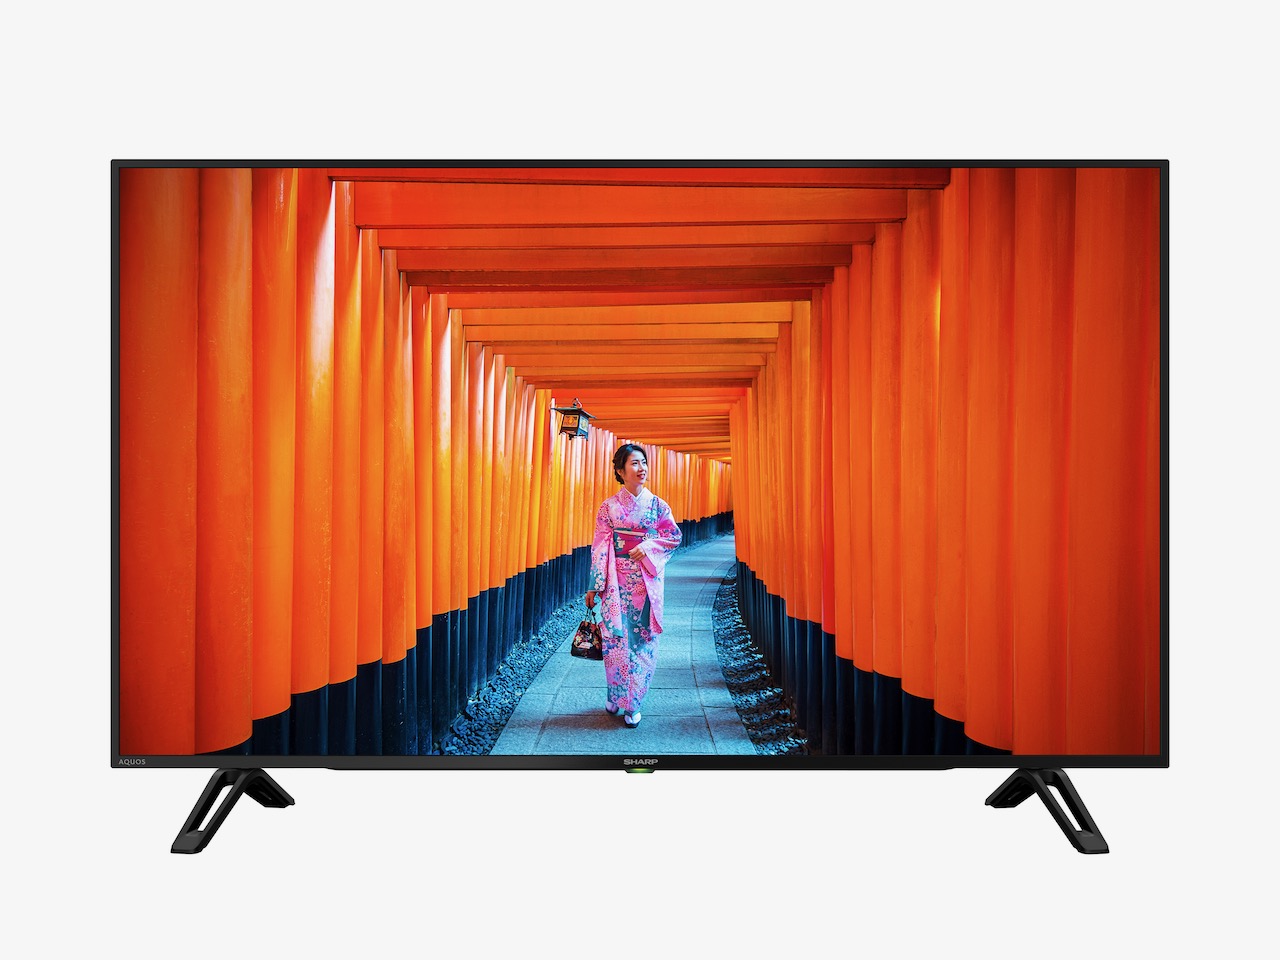 SHARP Launched 2020 Lineup of AQUOS 4K UHD Android TVs